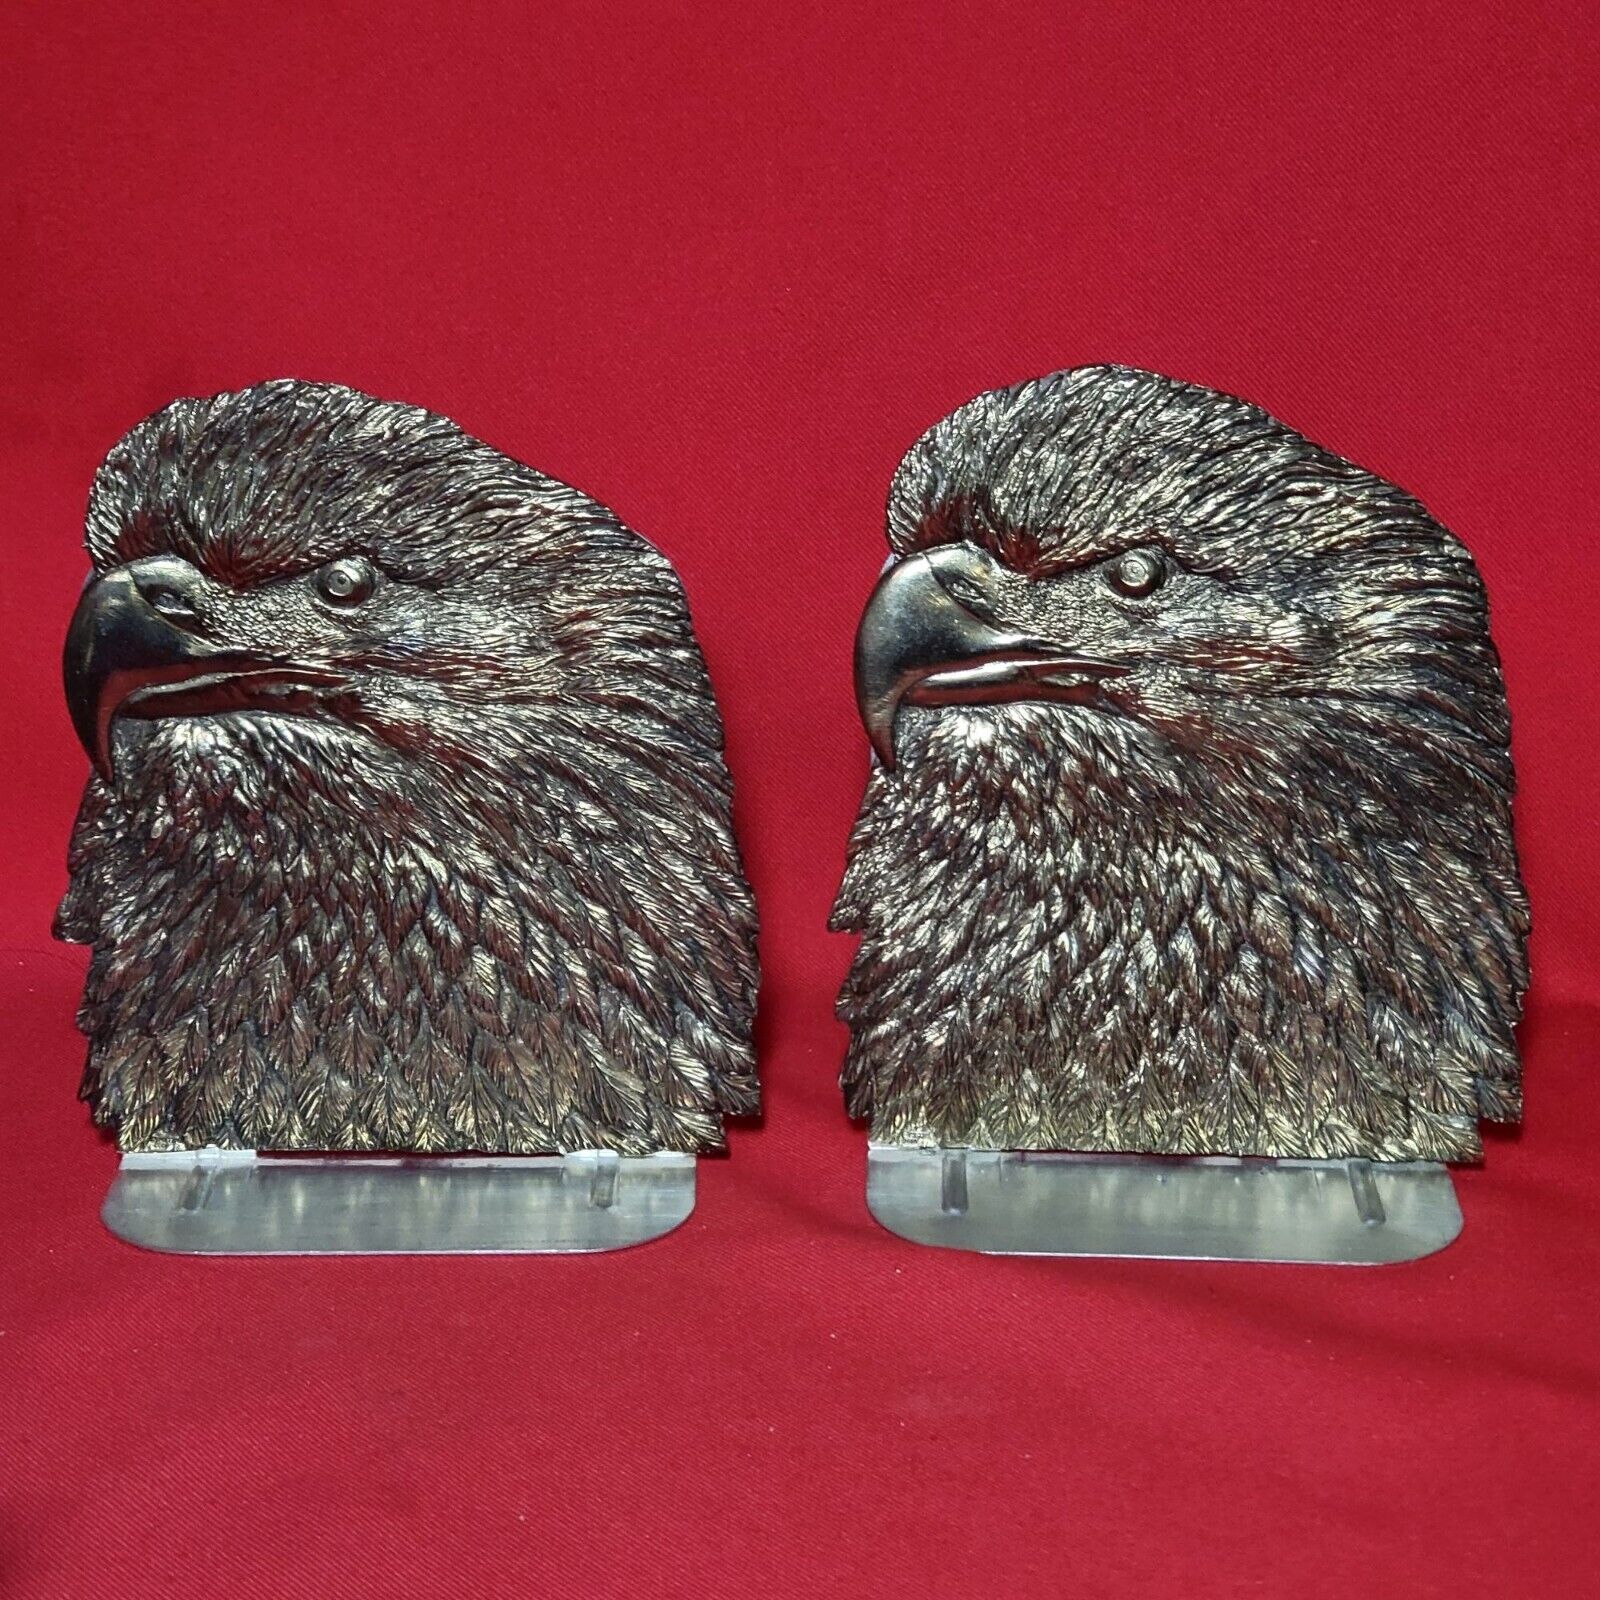 Vintage Brass American Bald Eagle Bookends Office Home Decor Library